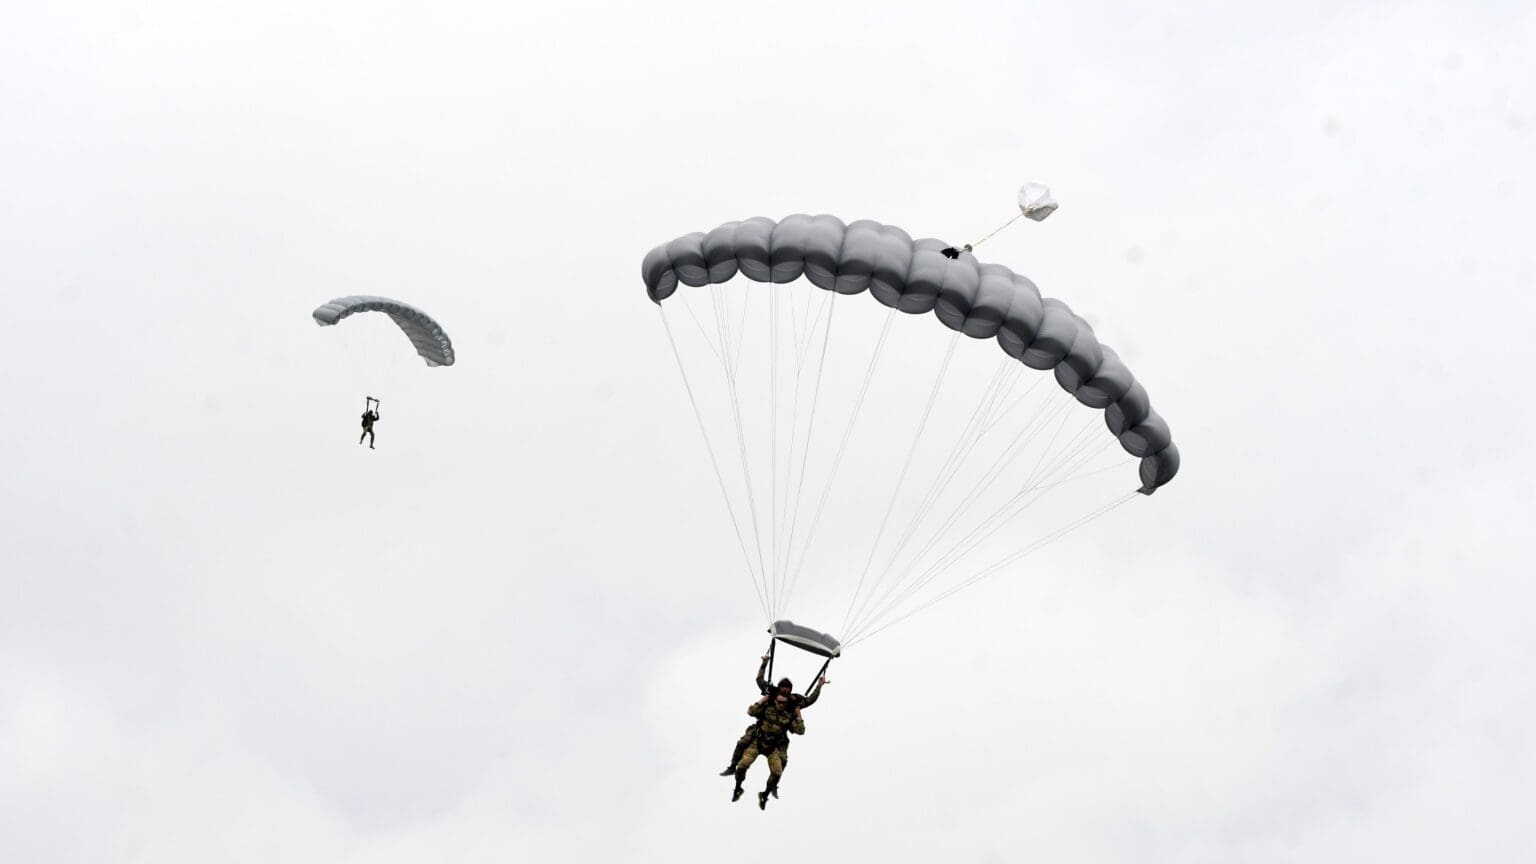 Hungarian Government’s Commitment to Sports Highlighted at Parachuting World Championship